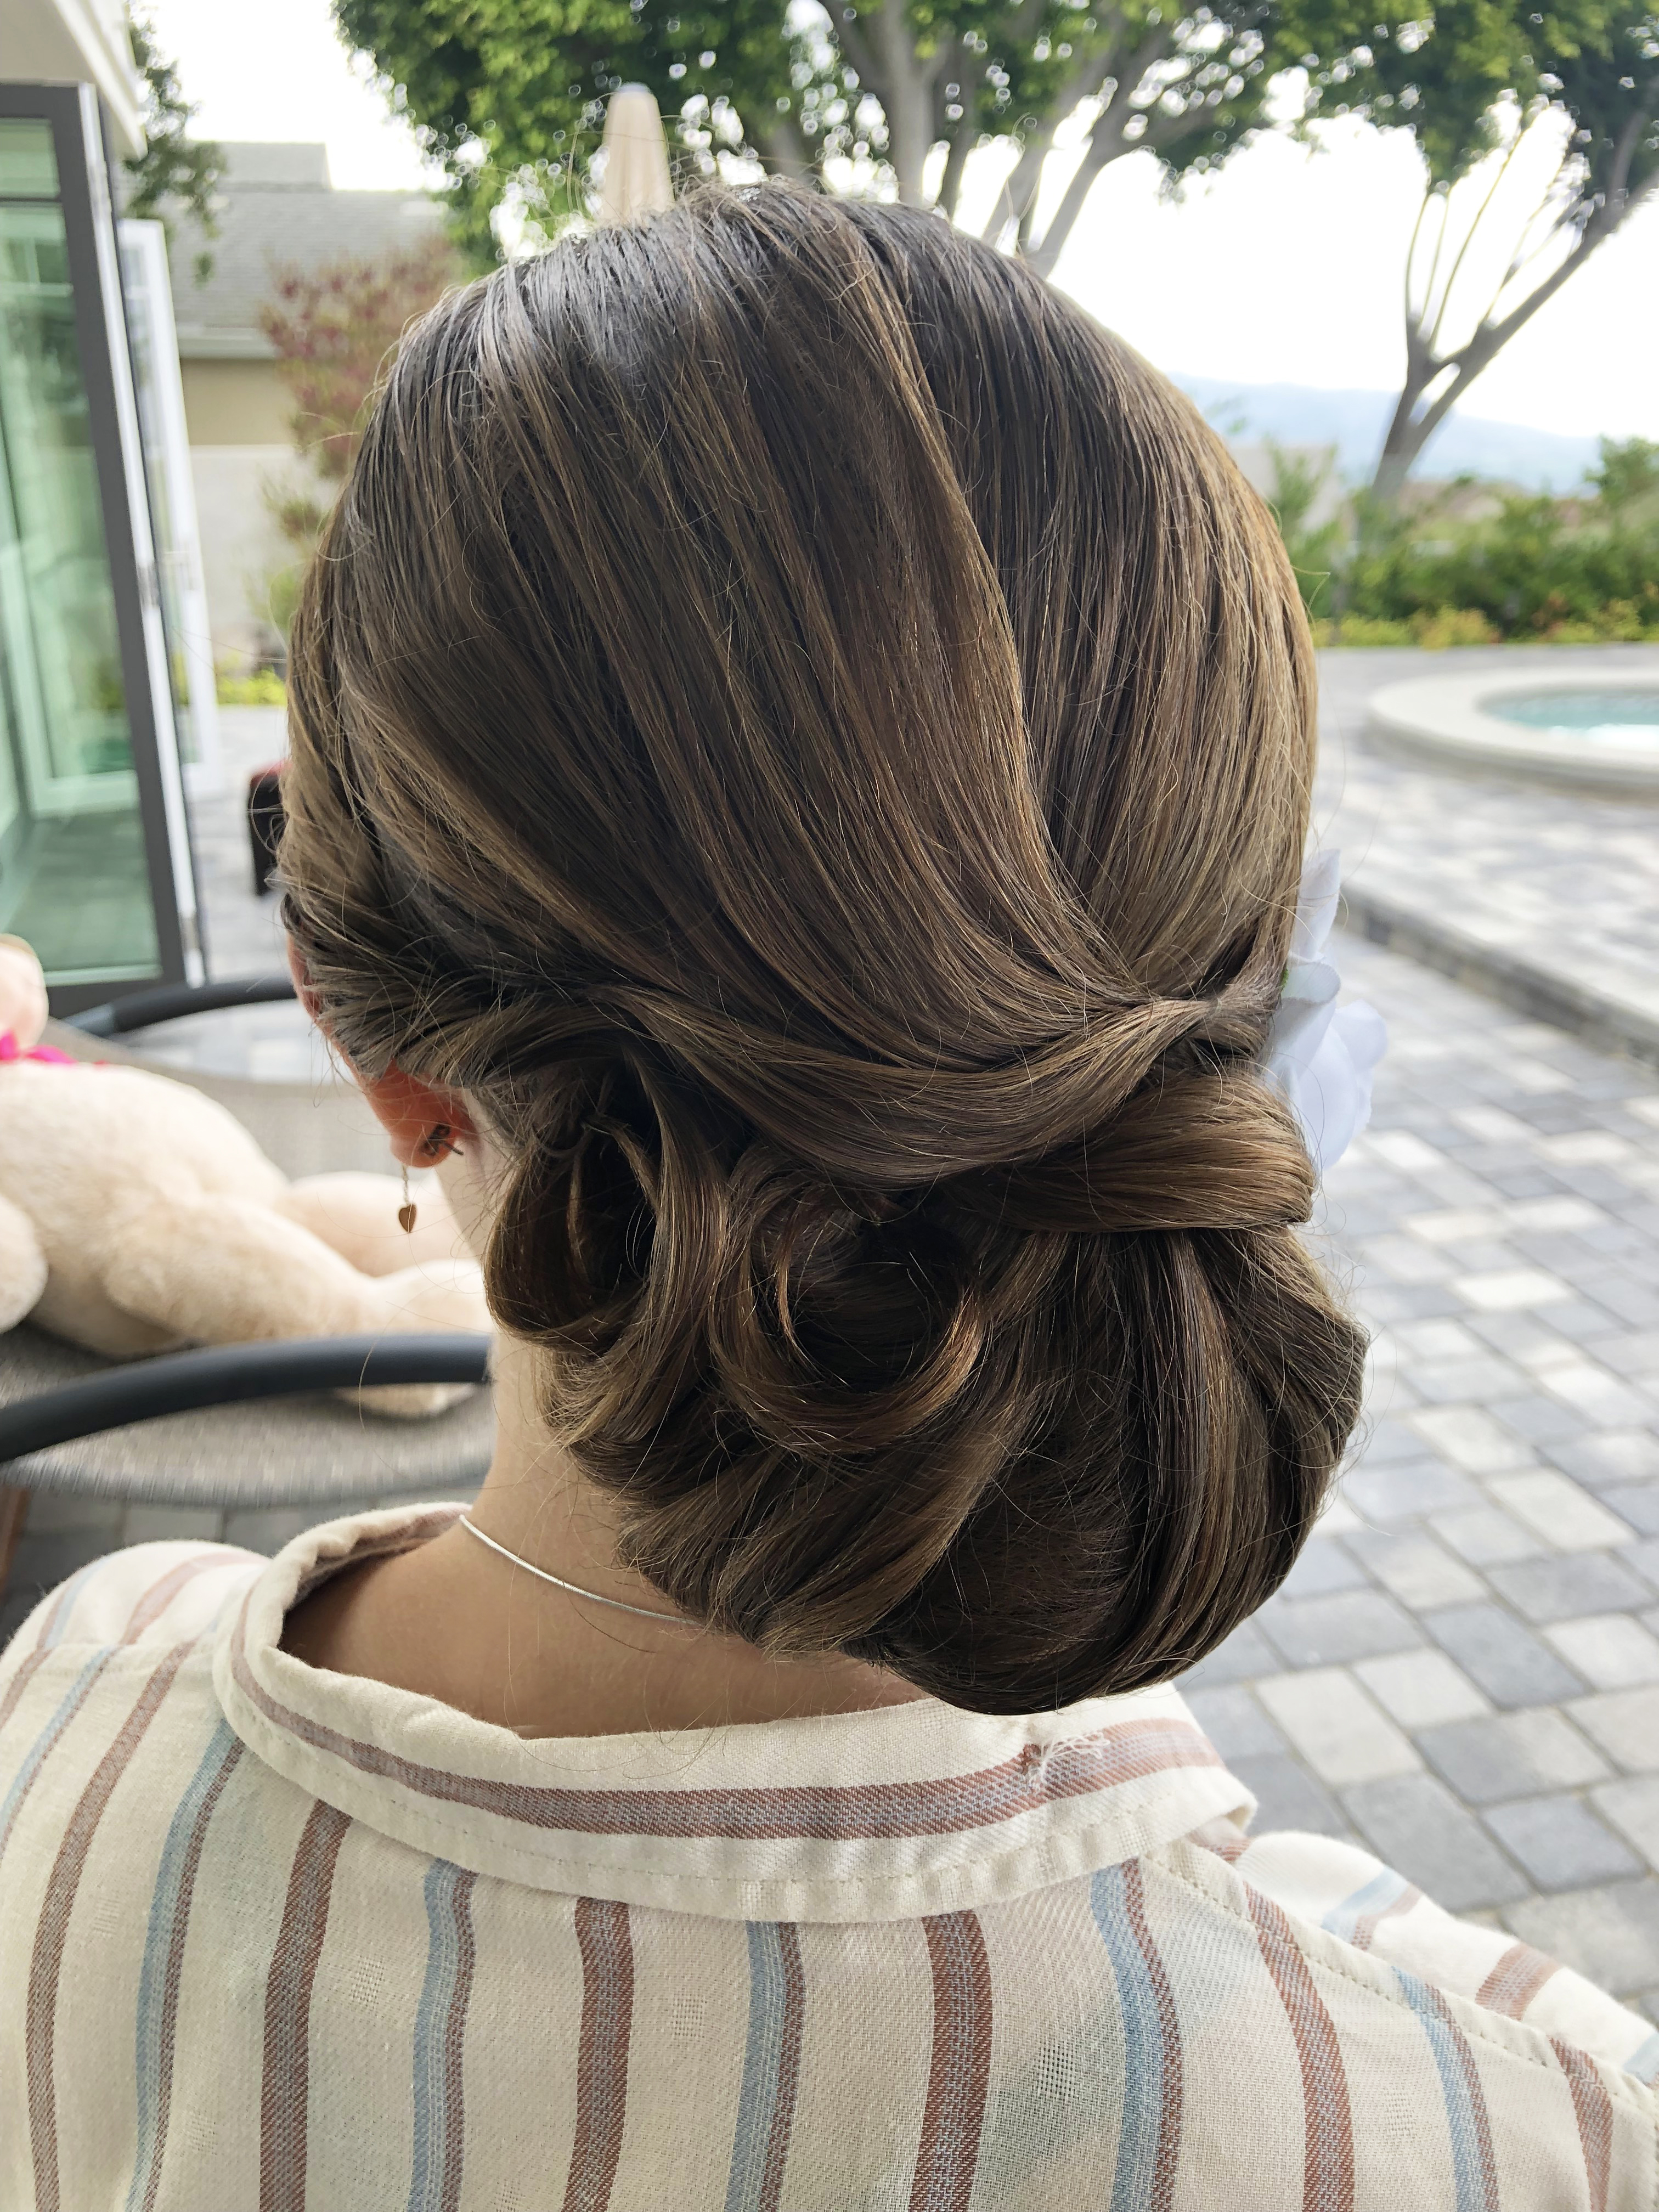 southern california wedding makeup artist does updo hairstyle